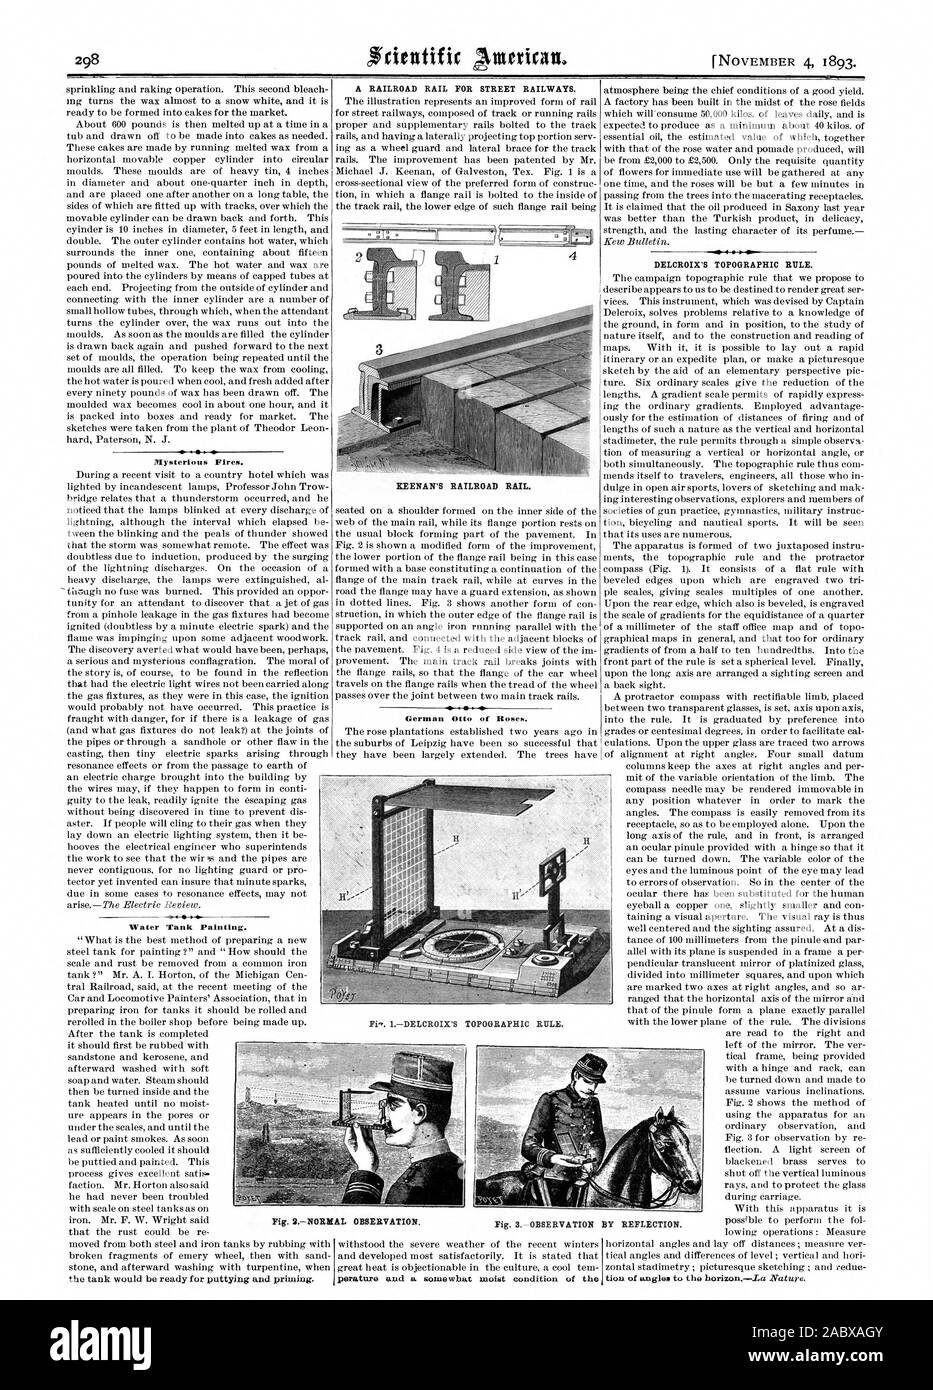 Mysterious Fires. Water Tank Painting. A RAILROAD RAIL FOR STREET RAILWAYS. KEENAN'S RAILROAD RAIL. German Otto of Roses. DELCROIX'S TOPOGRAPHIC RULE. Fig. 3.--NORM AL OBSERVATION. Fig. 3OBSERVATION BY REFLECTION., scientific american, 1893-11-04 Stock Photo